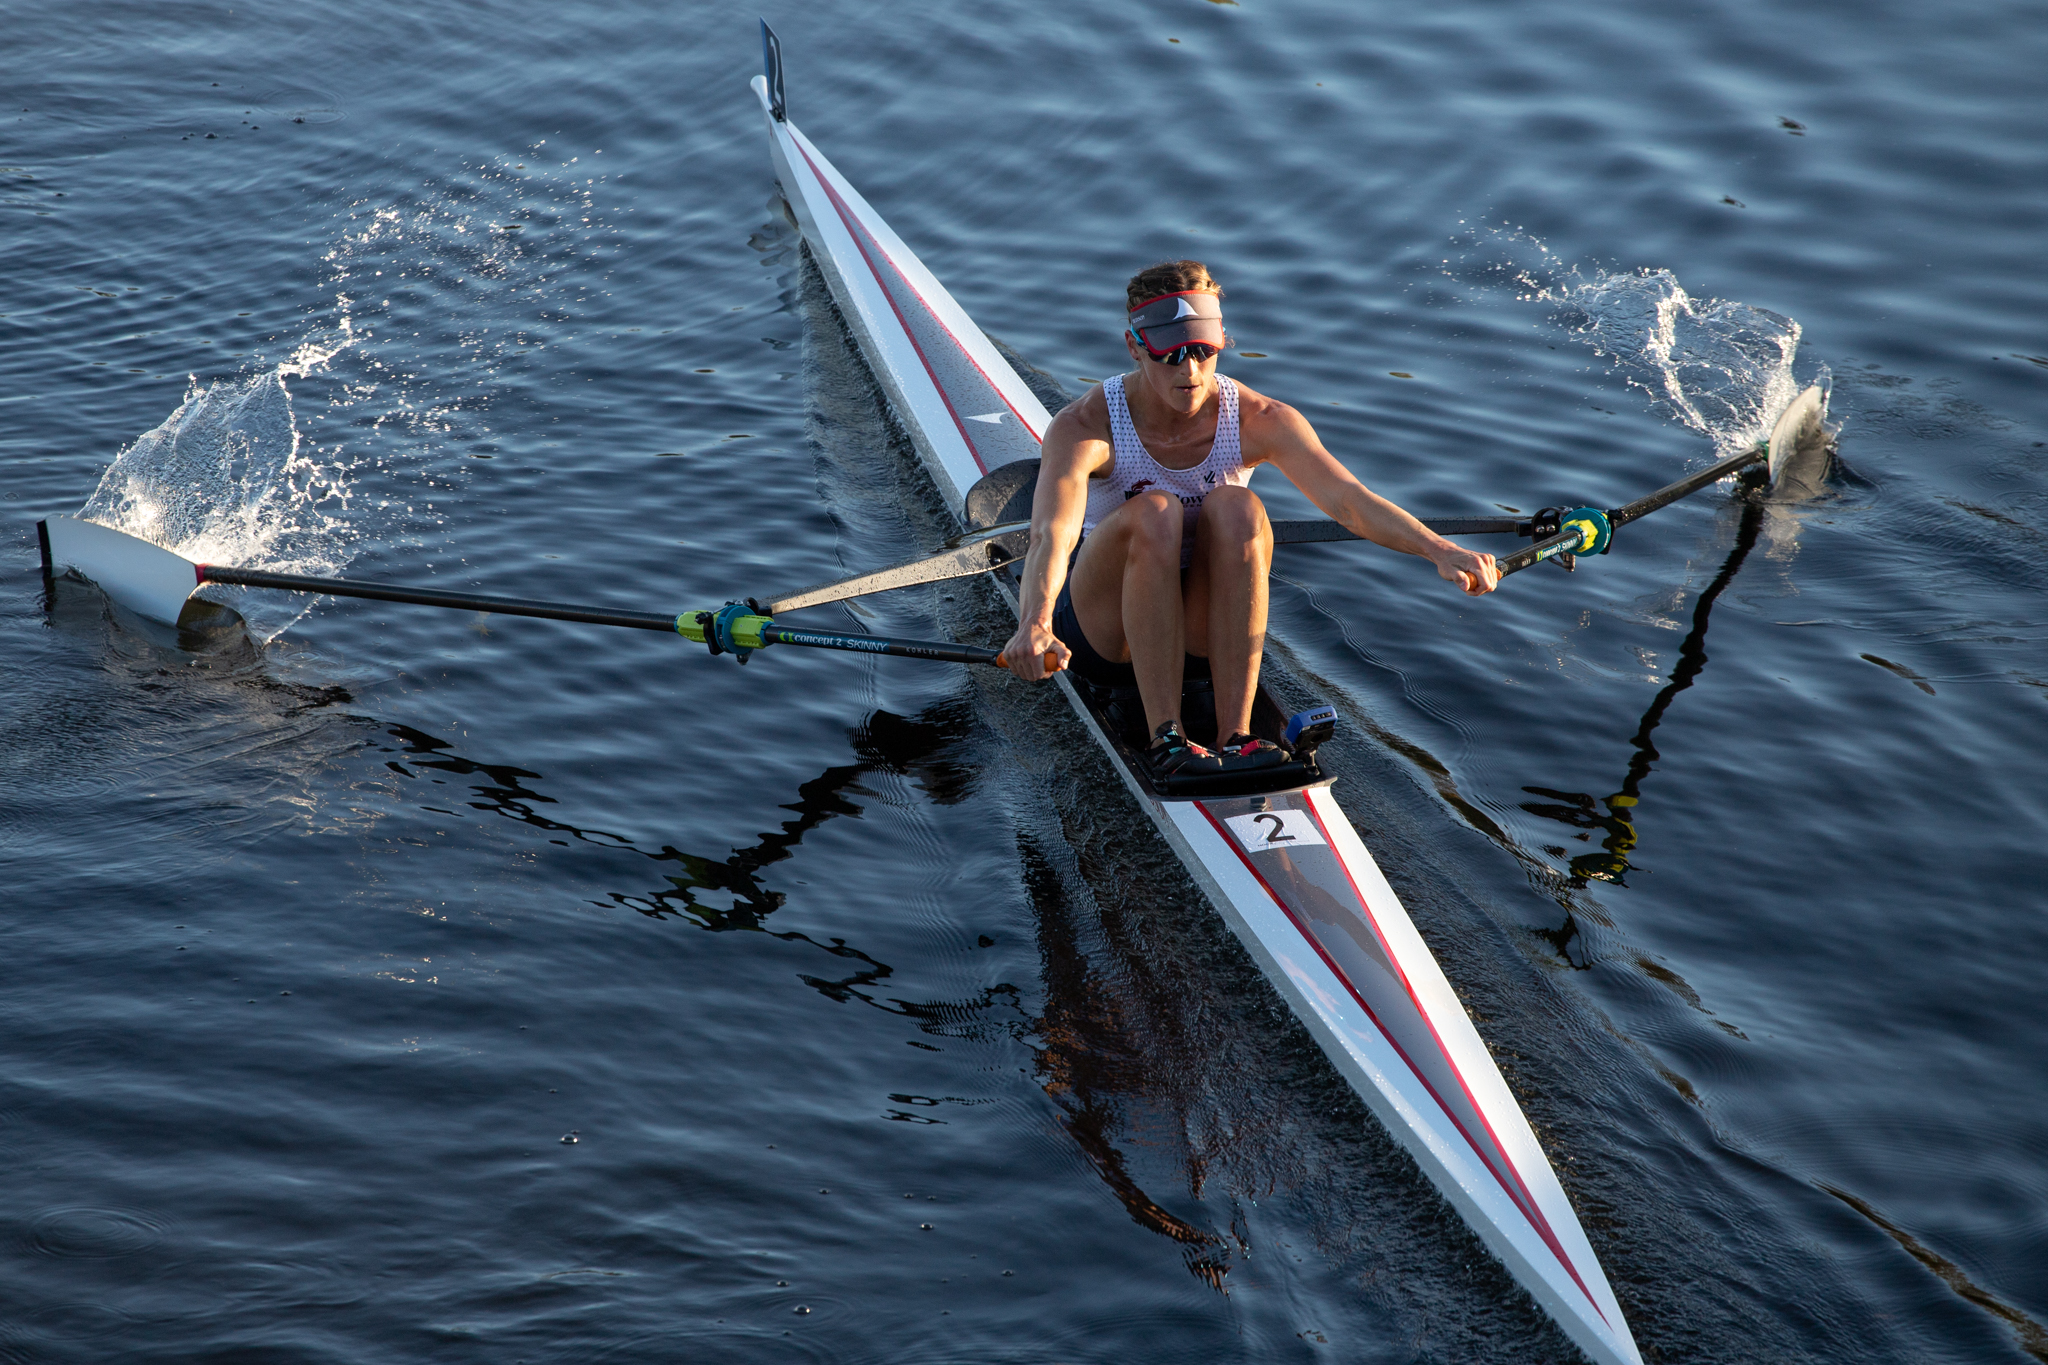 Head Of The Charles Regatta 2019 to Showcase Top Rowing Talent